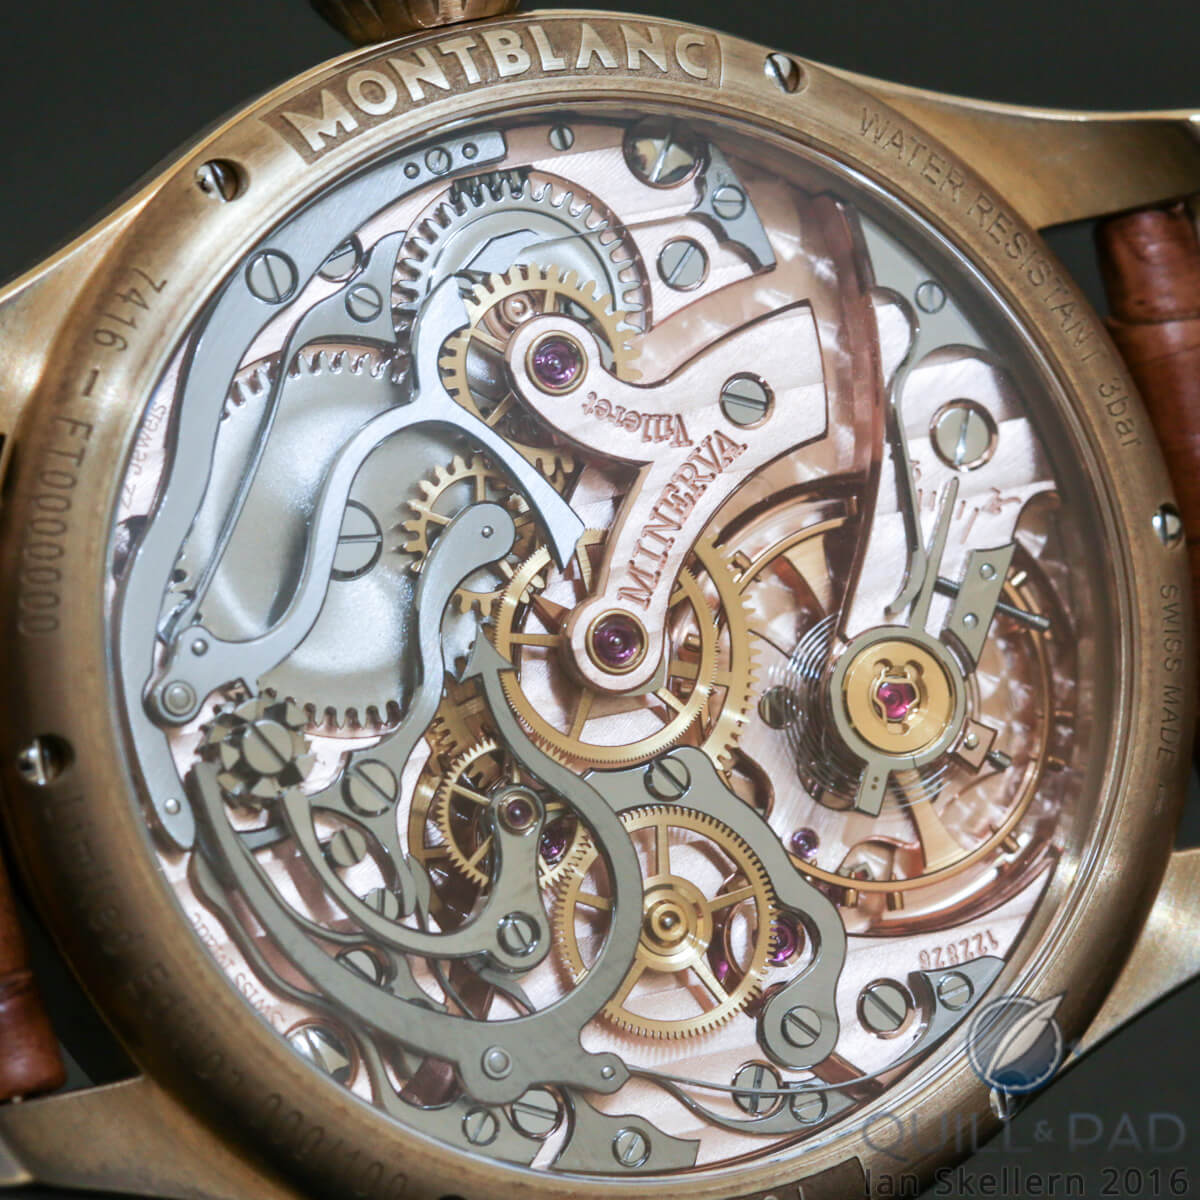 Beautiful movement of the Montblanc 1858 Chronograph Tachymeter Limited Edition